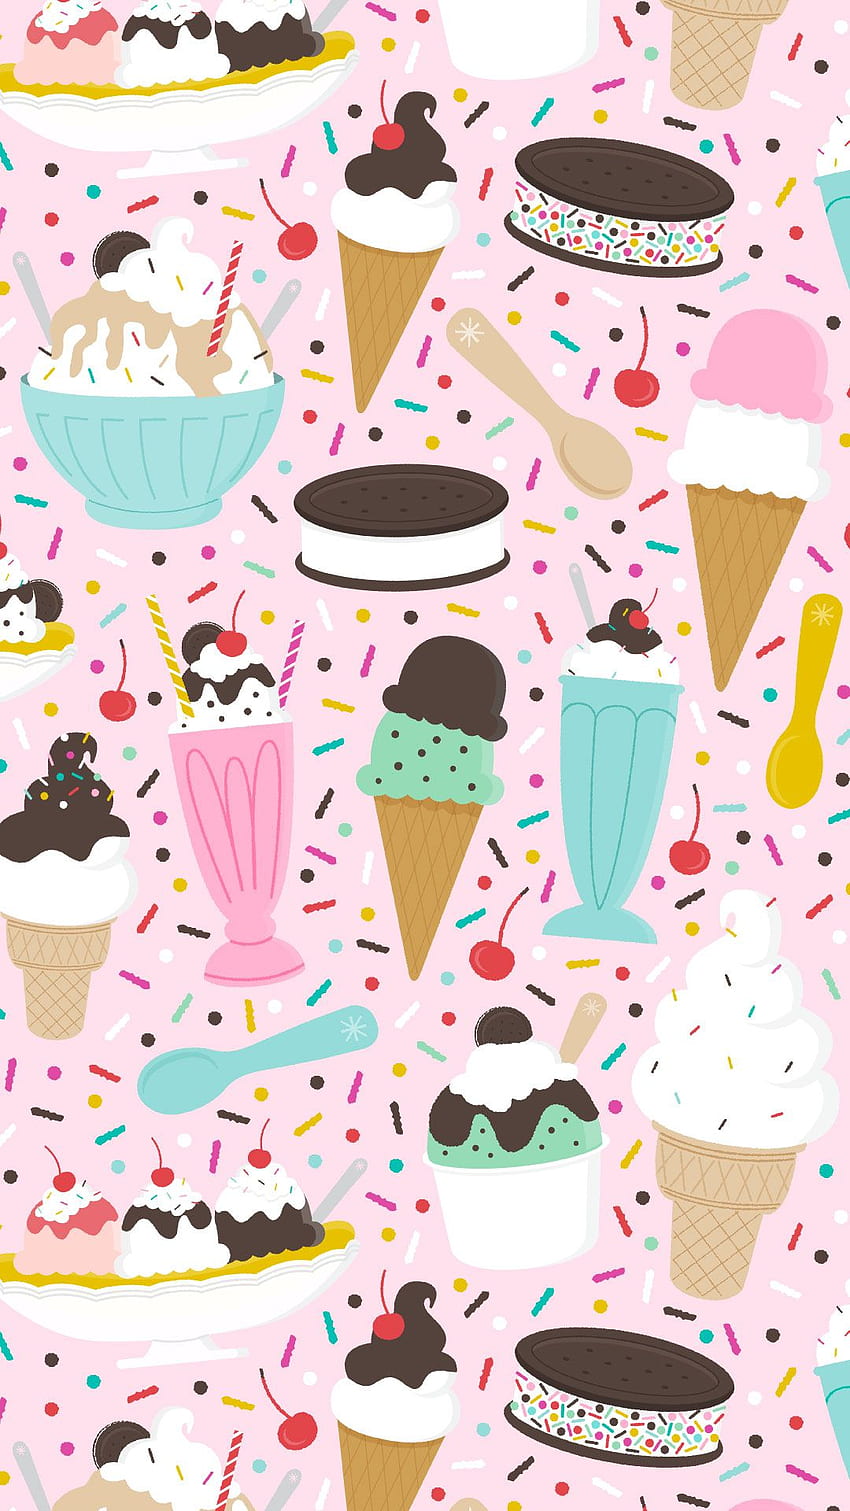 500 HQ Icecream Pictures  Download Free Images on Unsplash